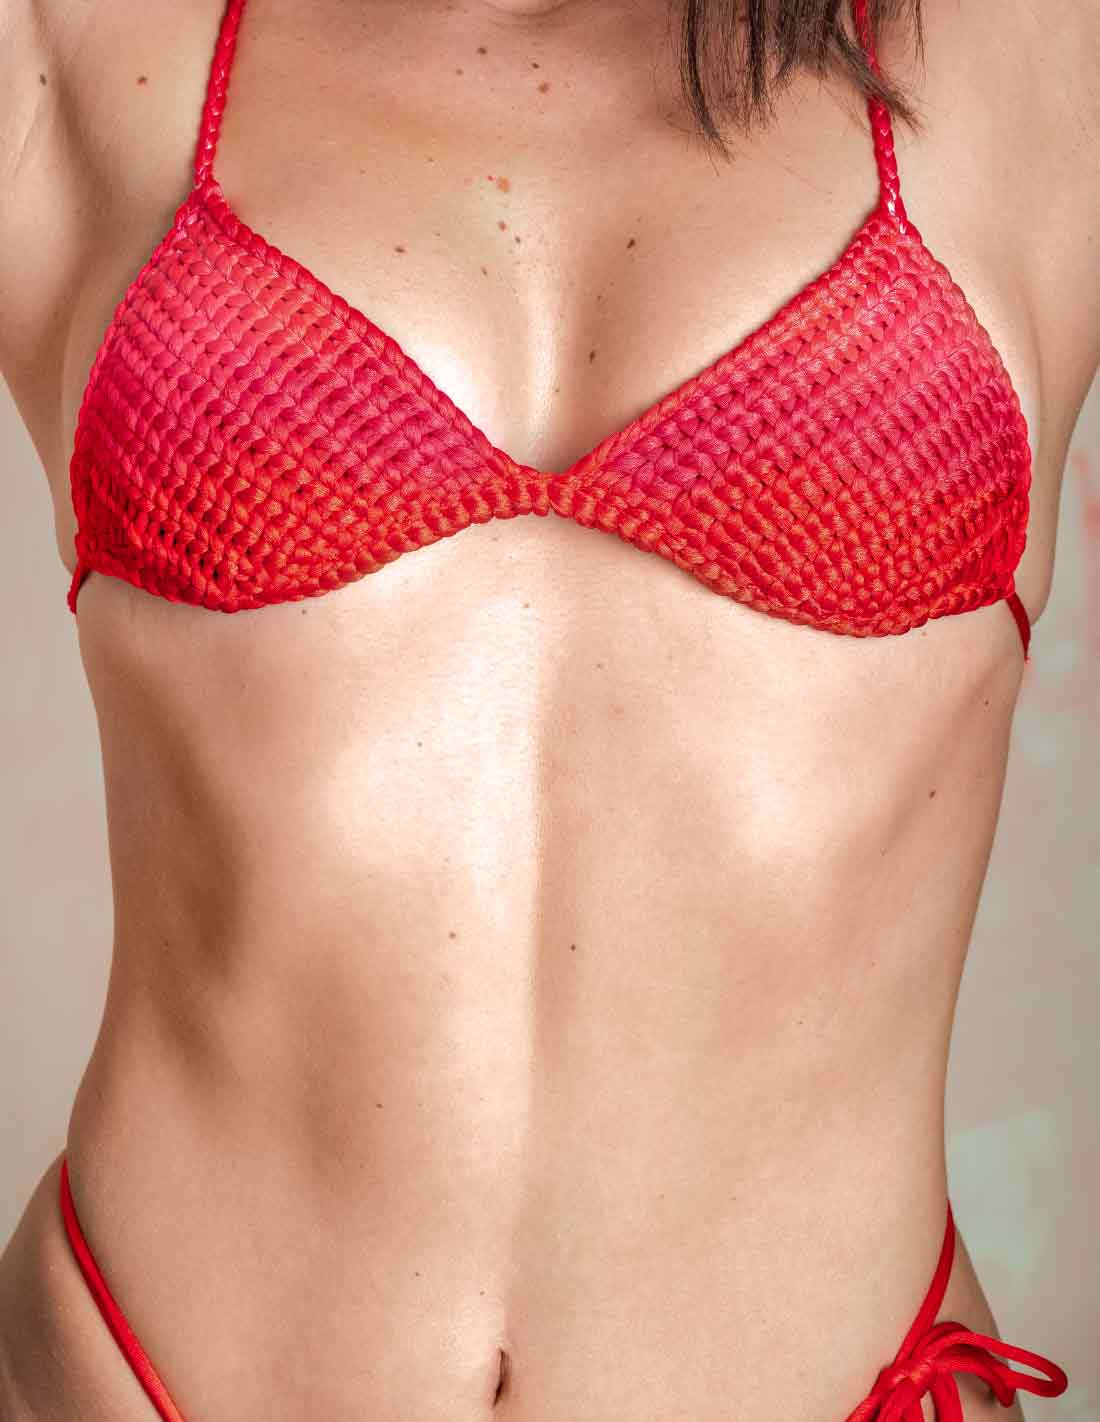 Chiflarte Top Red. Hand-Dyed Bikini Top With Hand Woven Macramé In Red. Entreaguas